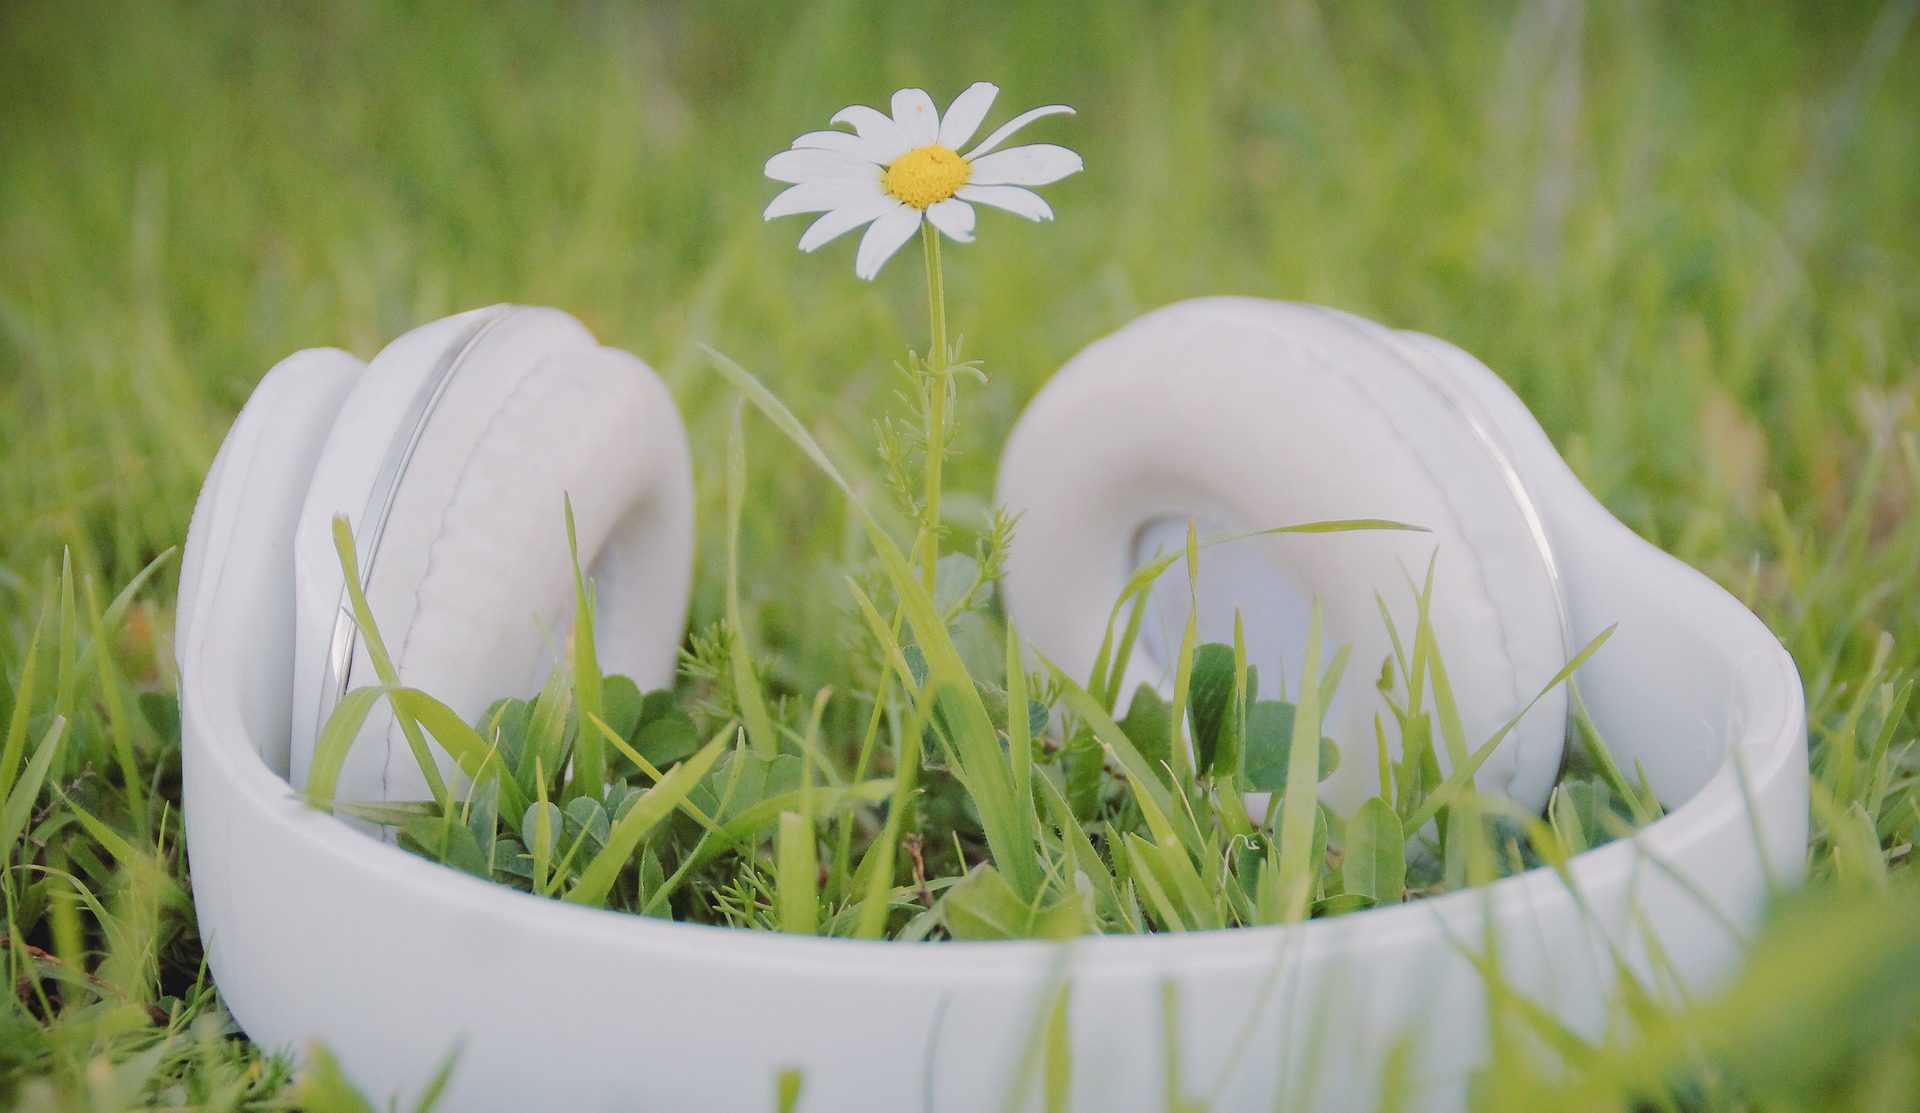 Image is of a set of white over the ear headphones in a green grassy field with a lone daisy poking out from in the middle of it. To represent listening to music in nature.